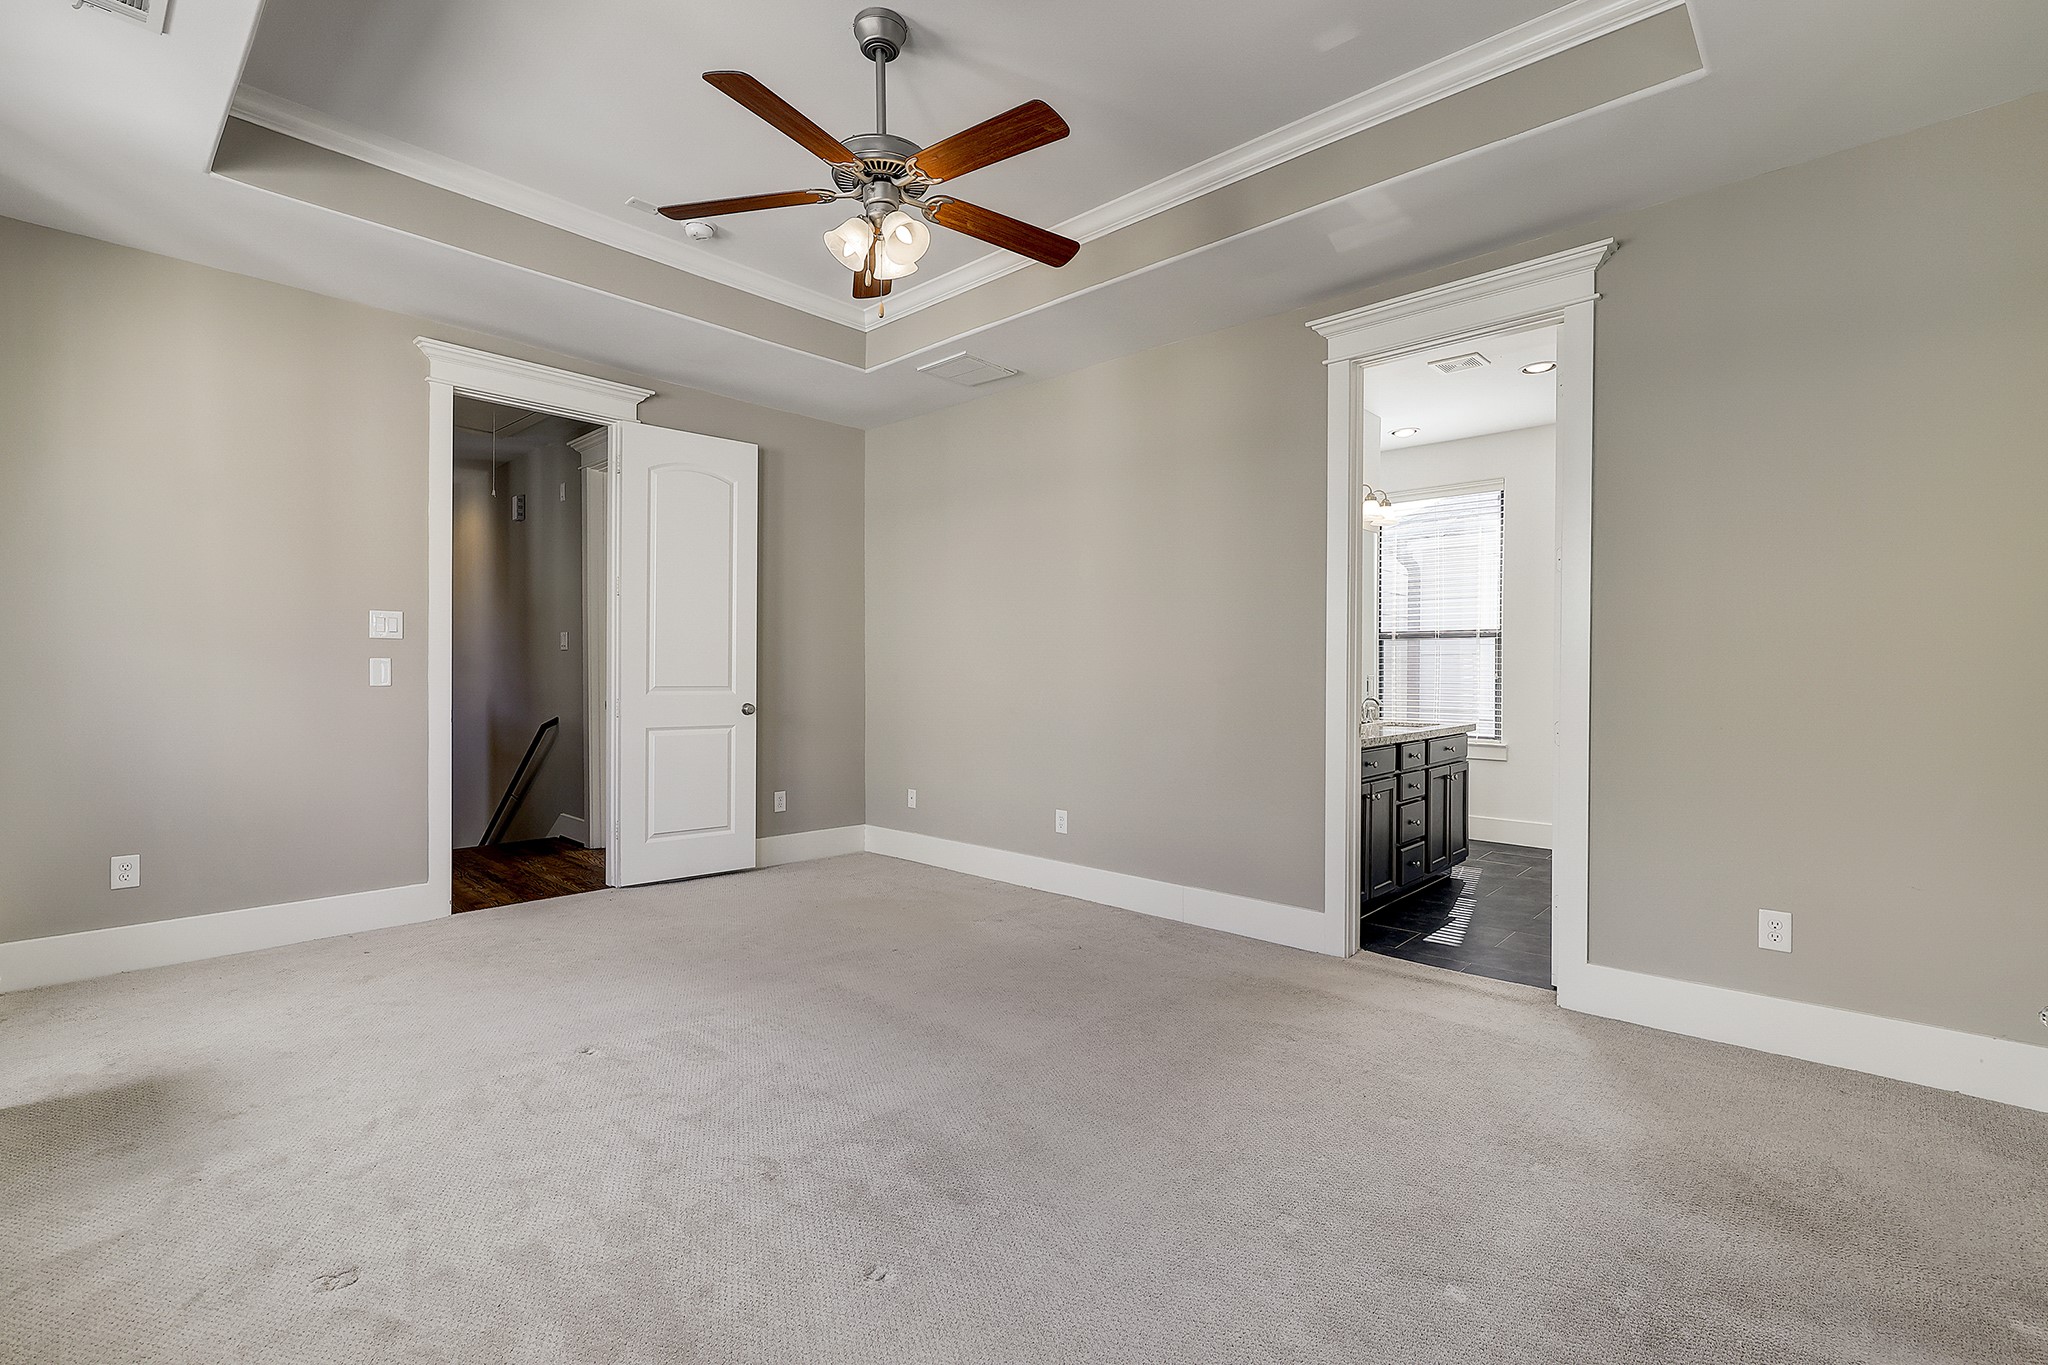 Follow the fabulous wood flooring to the top floor for the primary suite sure to impress.